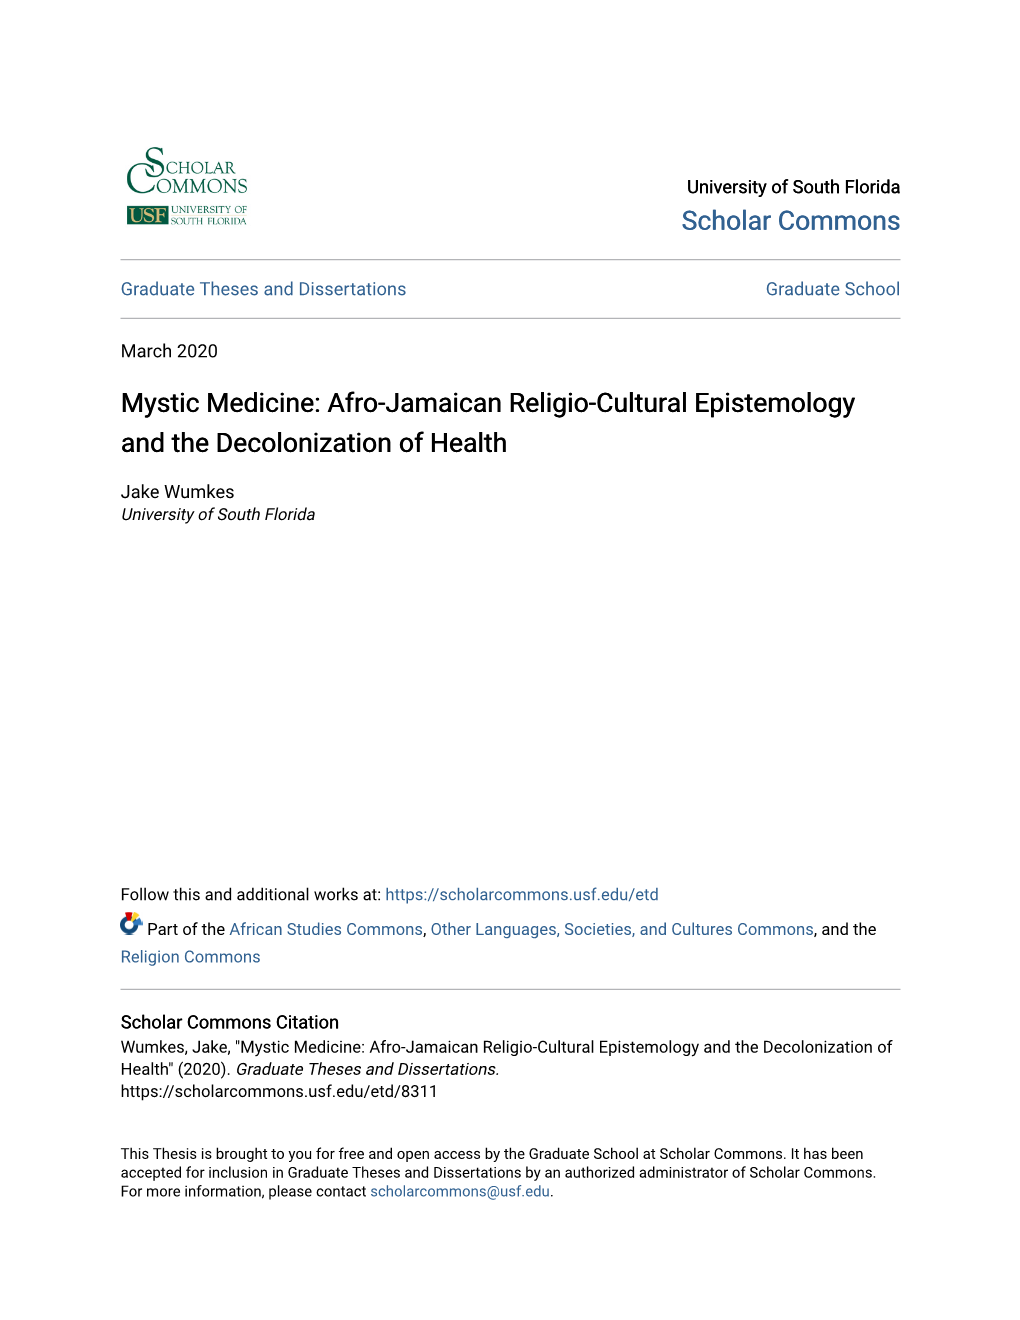 Afro-Jamaican Religio-Cultural Epistemology and the Decolonization of Health